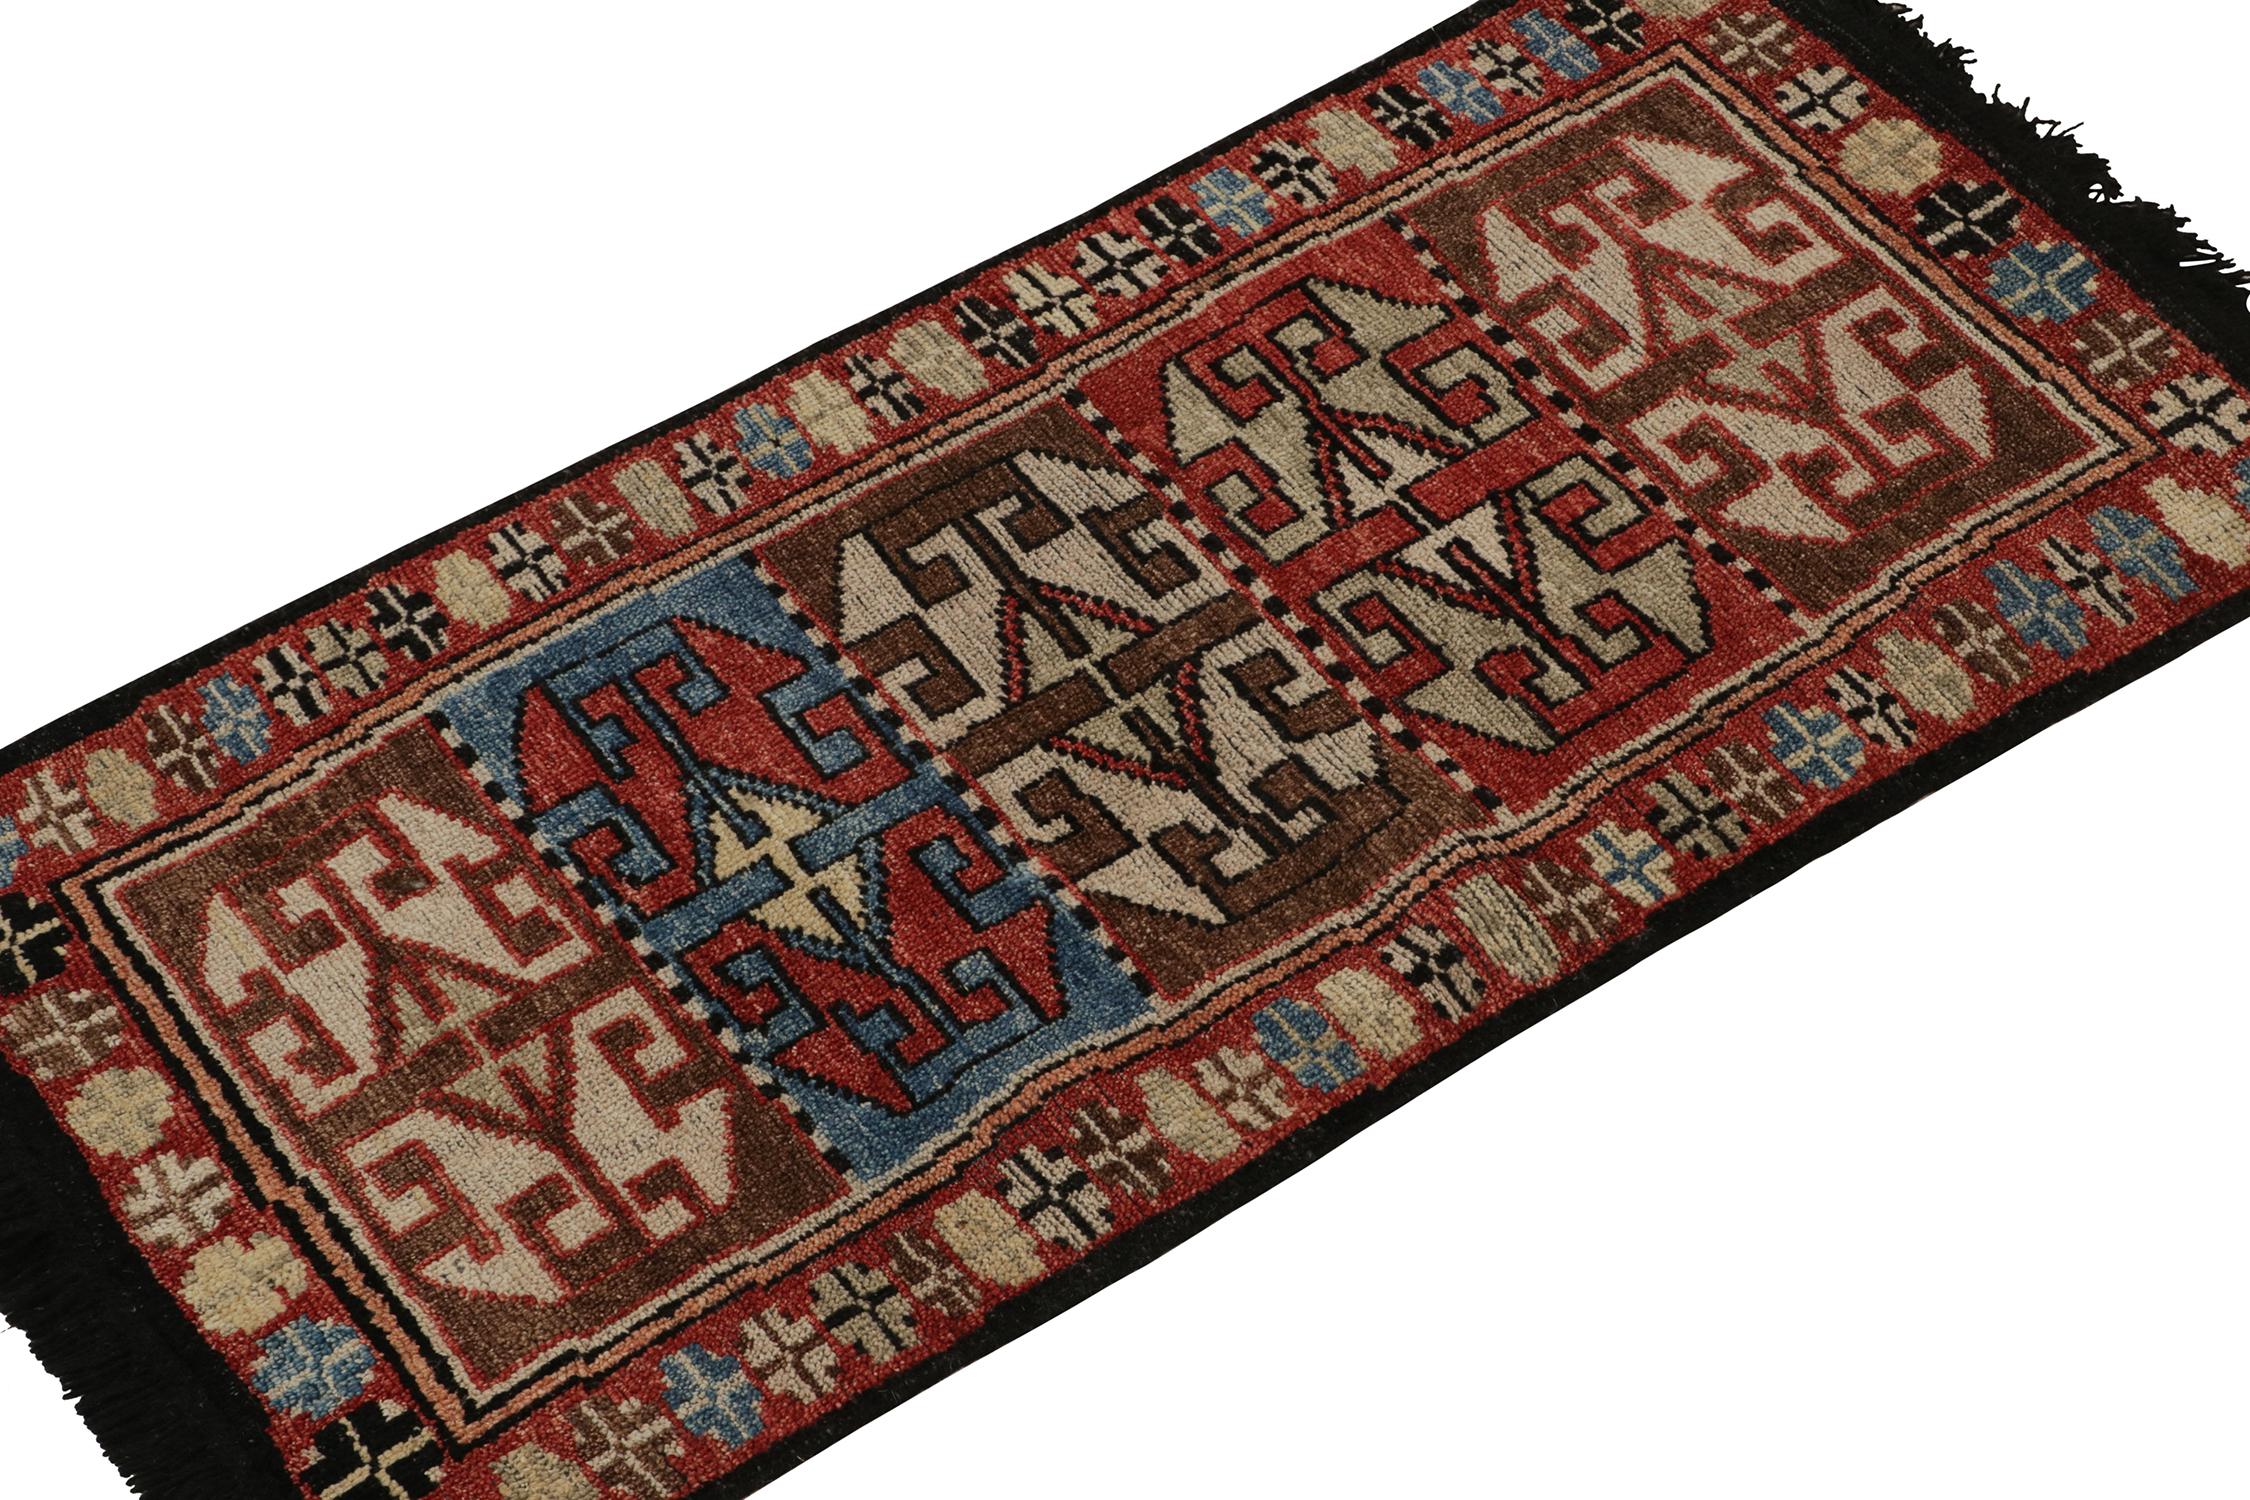 Connoting a contemporary take on nomadic tribal sensibilities, this 2x4 rug from Rug & Kilim’s Burano Collection. 

The design enjoys bold geometric motifs in red, chocolate brown, and blue with a natural gravity in this gift size. Hand-knotted in